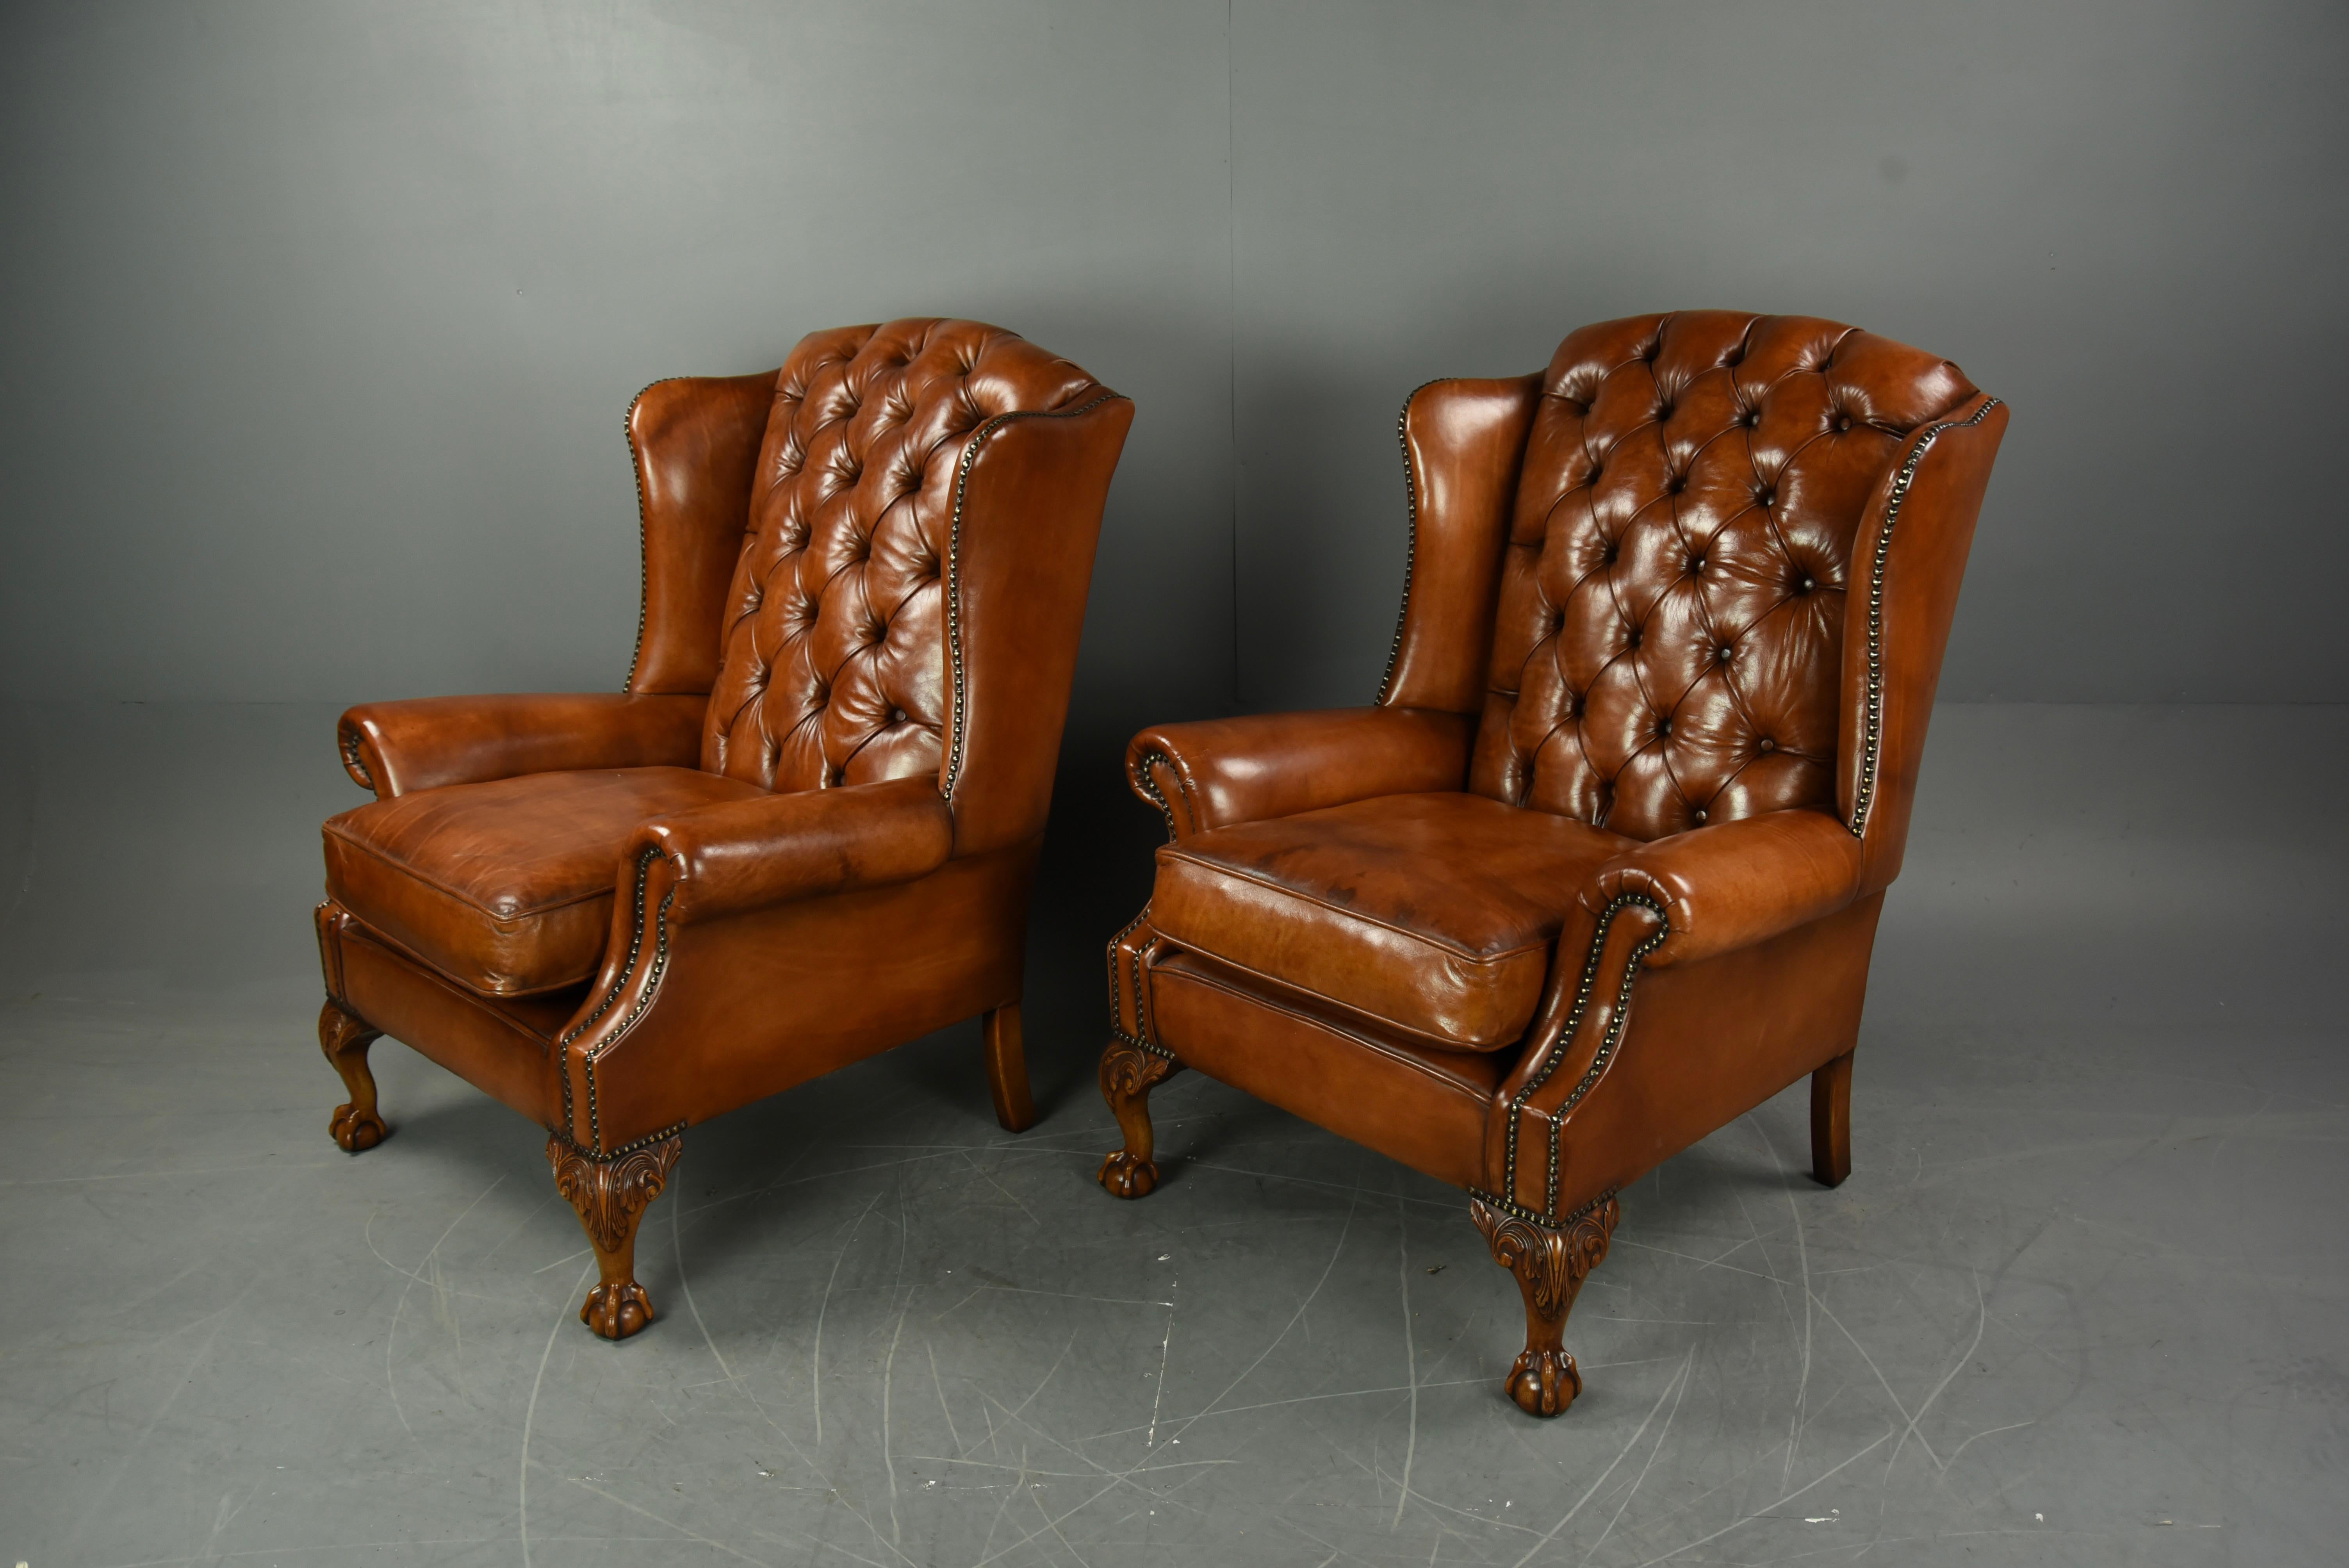 English Antique Pair of Georgian Style Wing Back Chairs